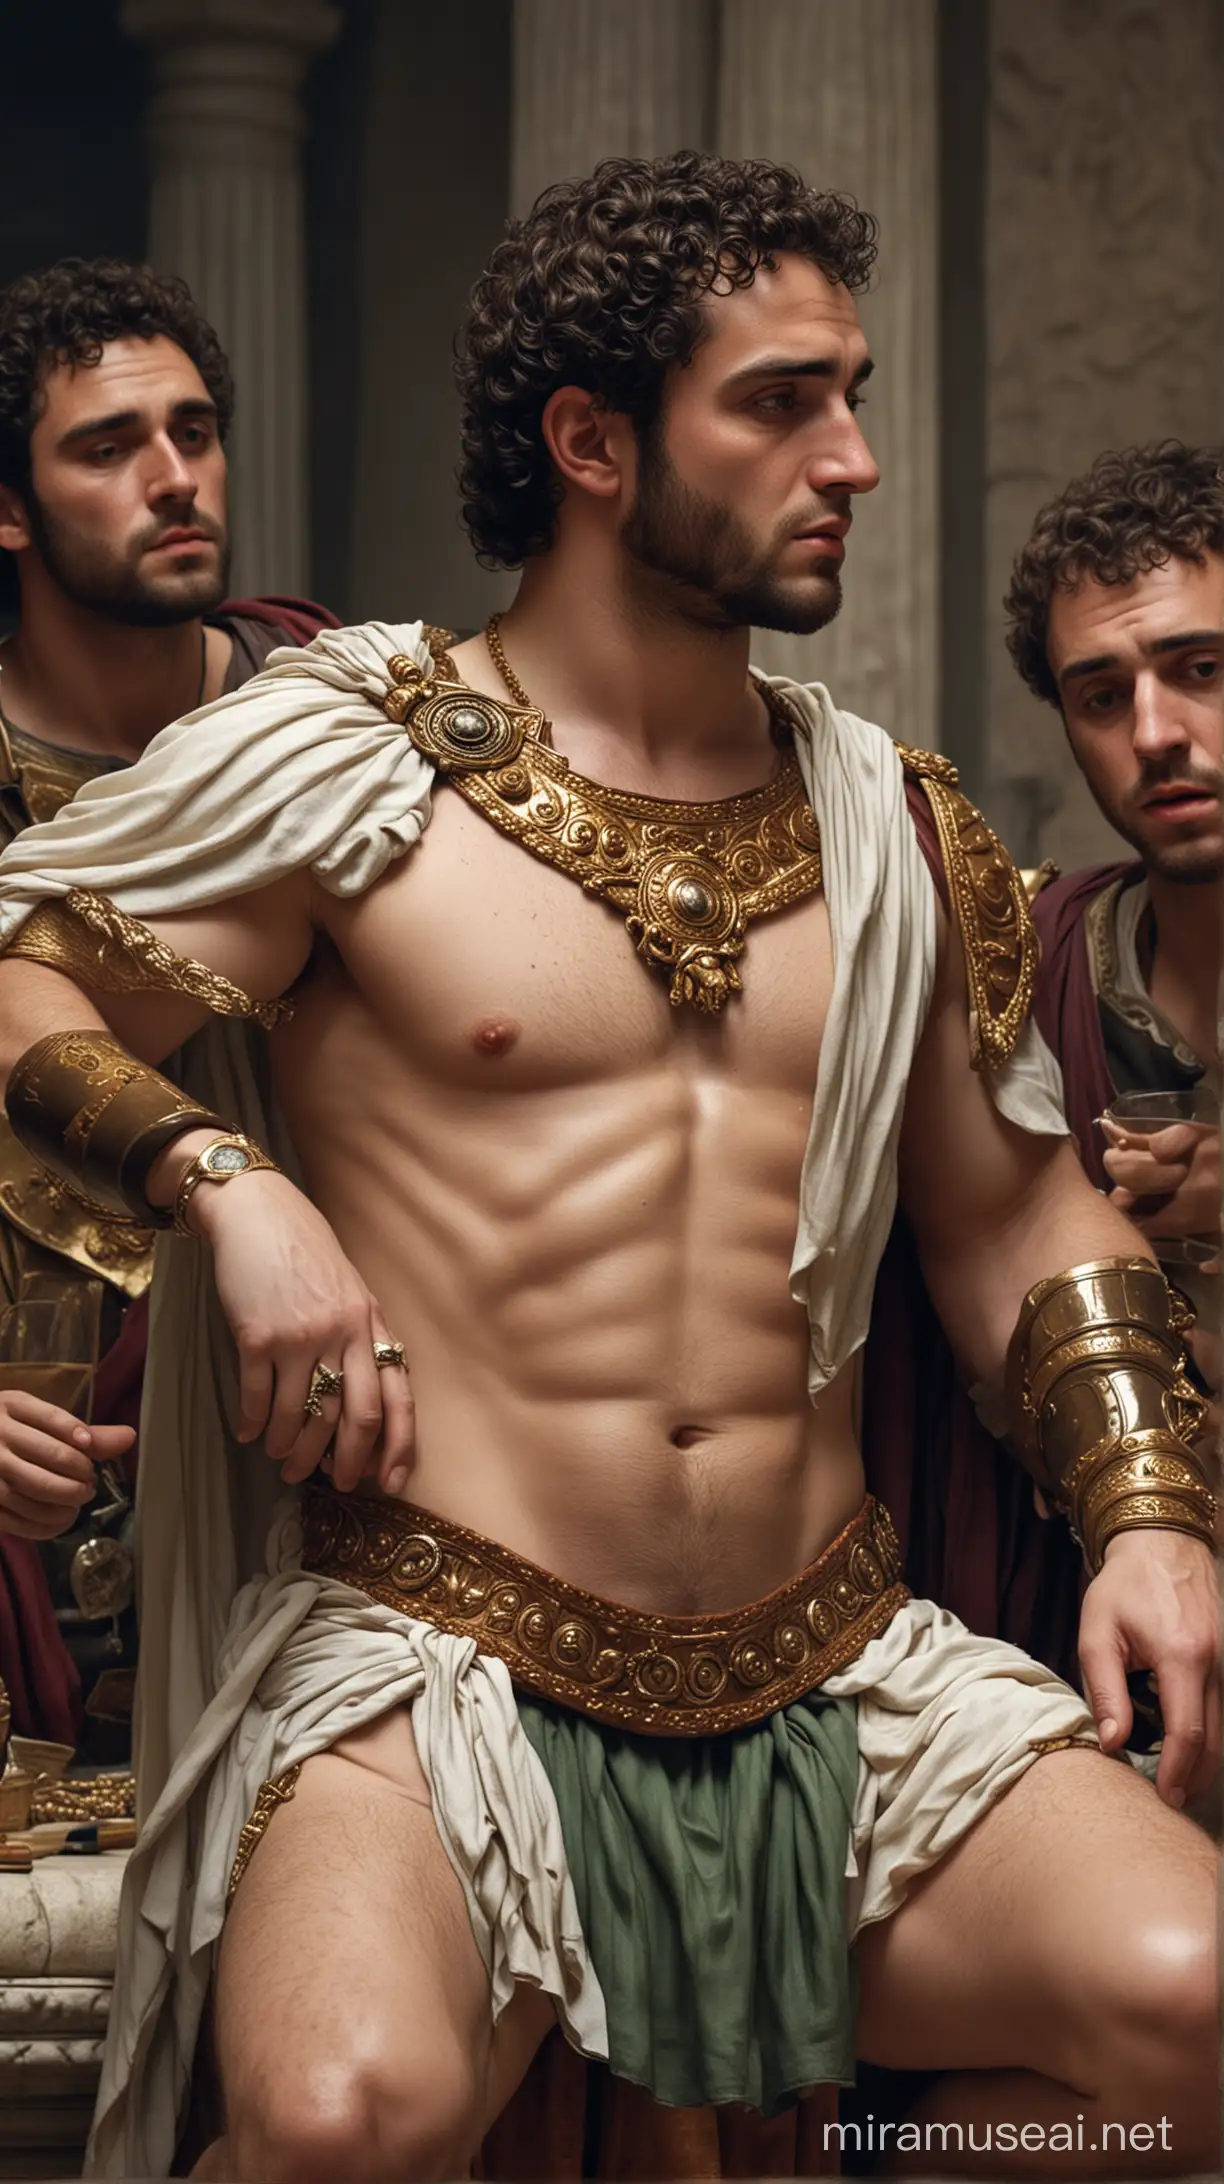 Ignoring the affairs of the empire, Commodus spent his time drinking and womanizing. hyper realistic